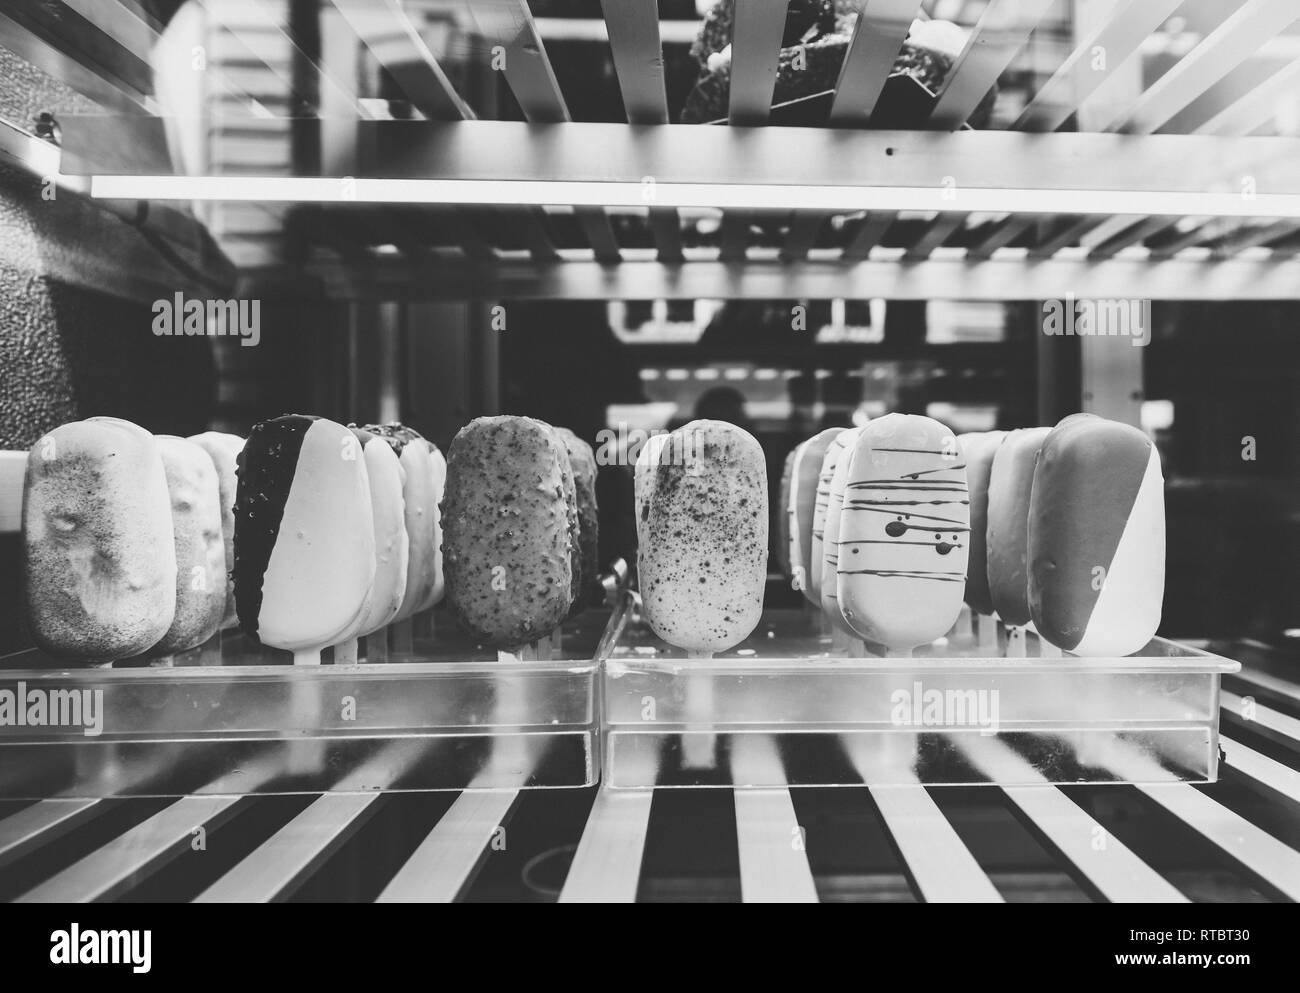 Italian ice cream shop in diverse multicolored flavors made from organic ingredients in showcase window of a traditional vintage icecream shop black and white  Stock Photo